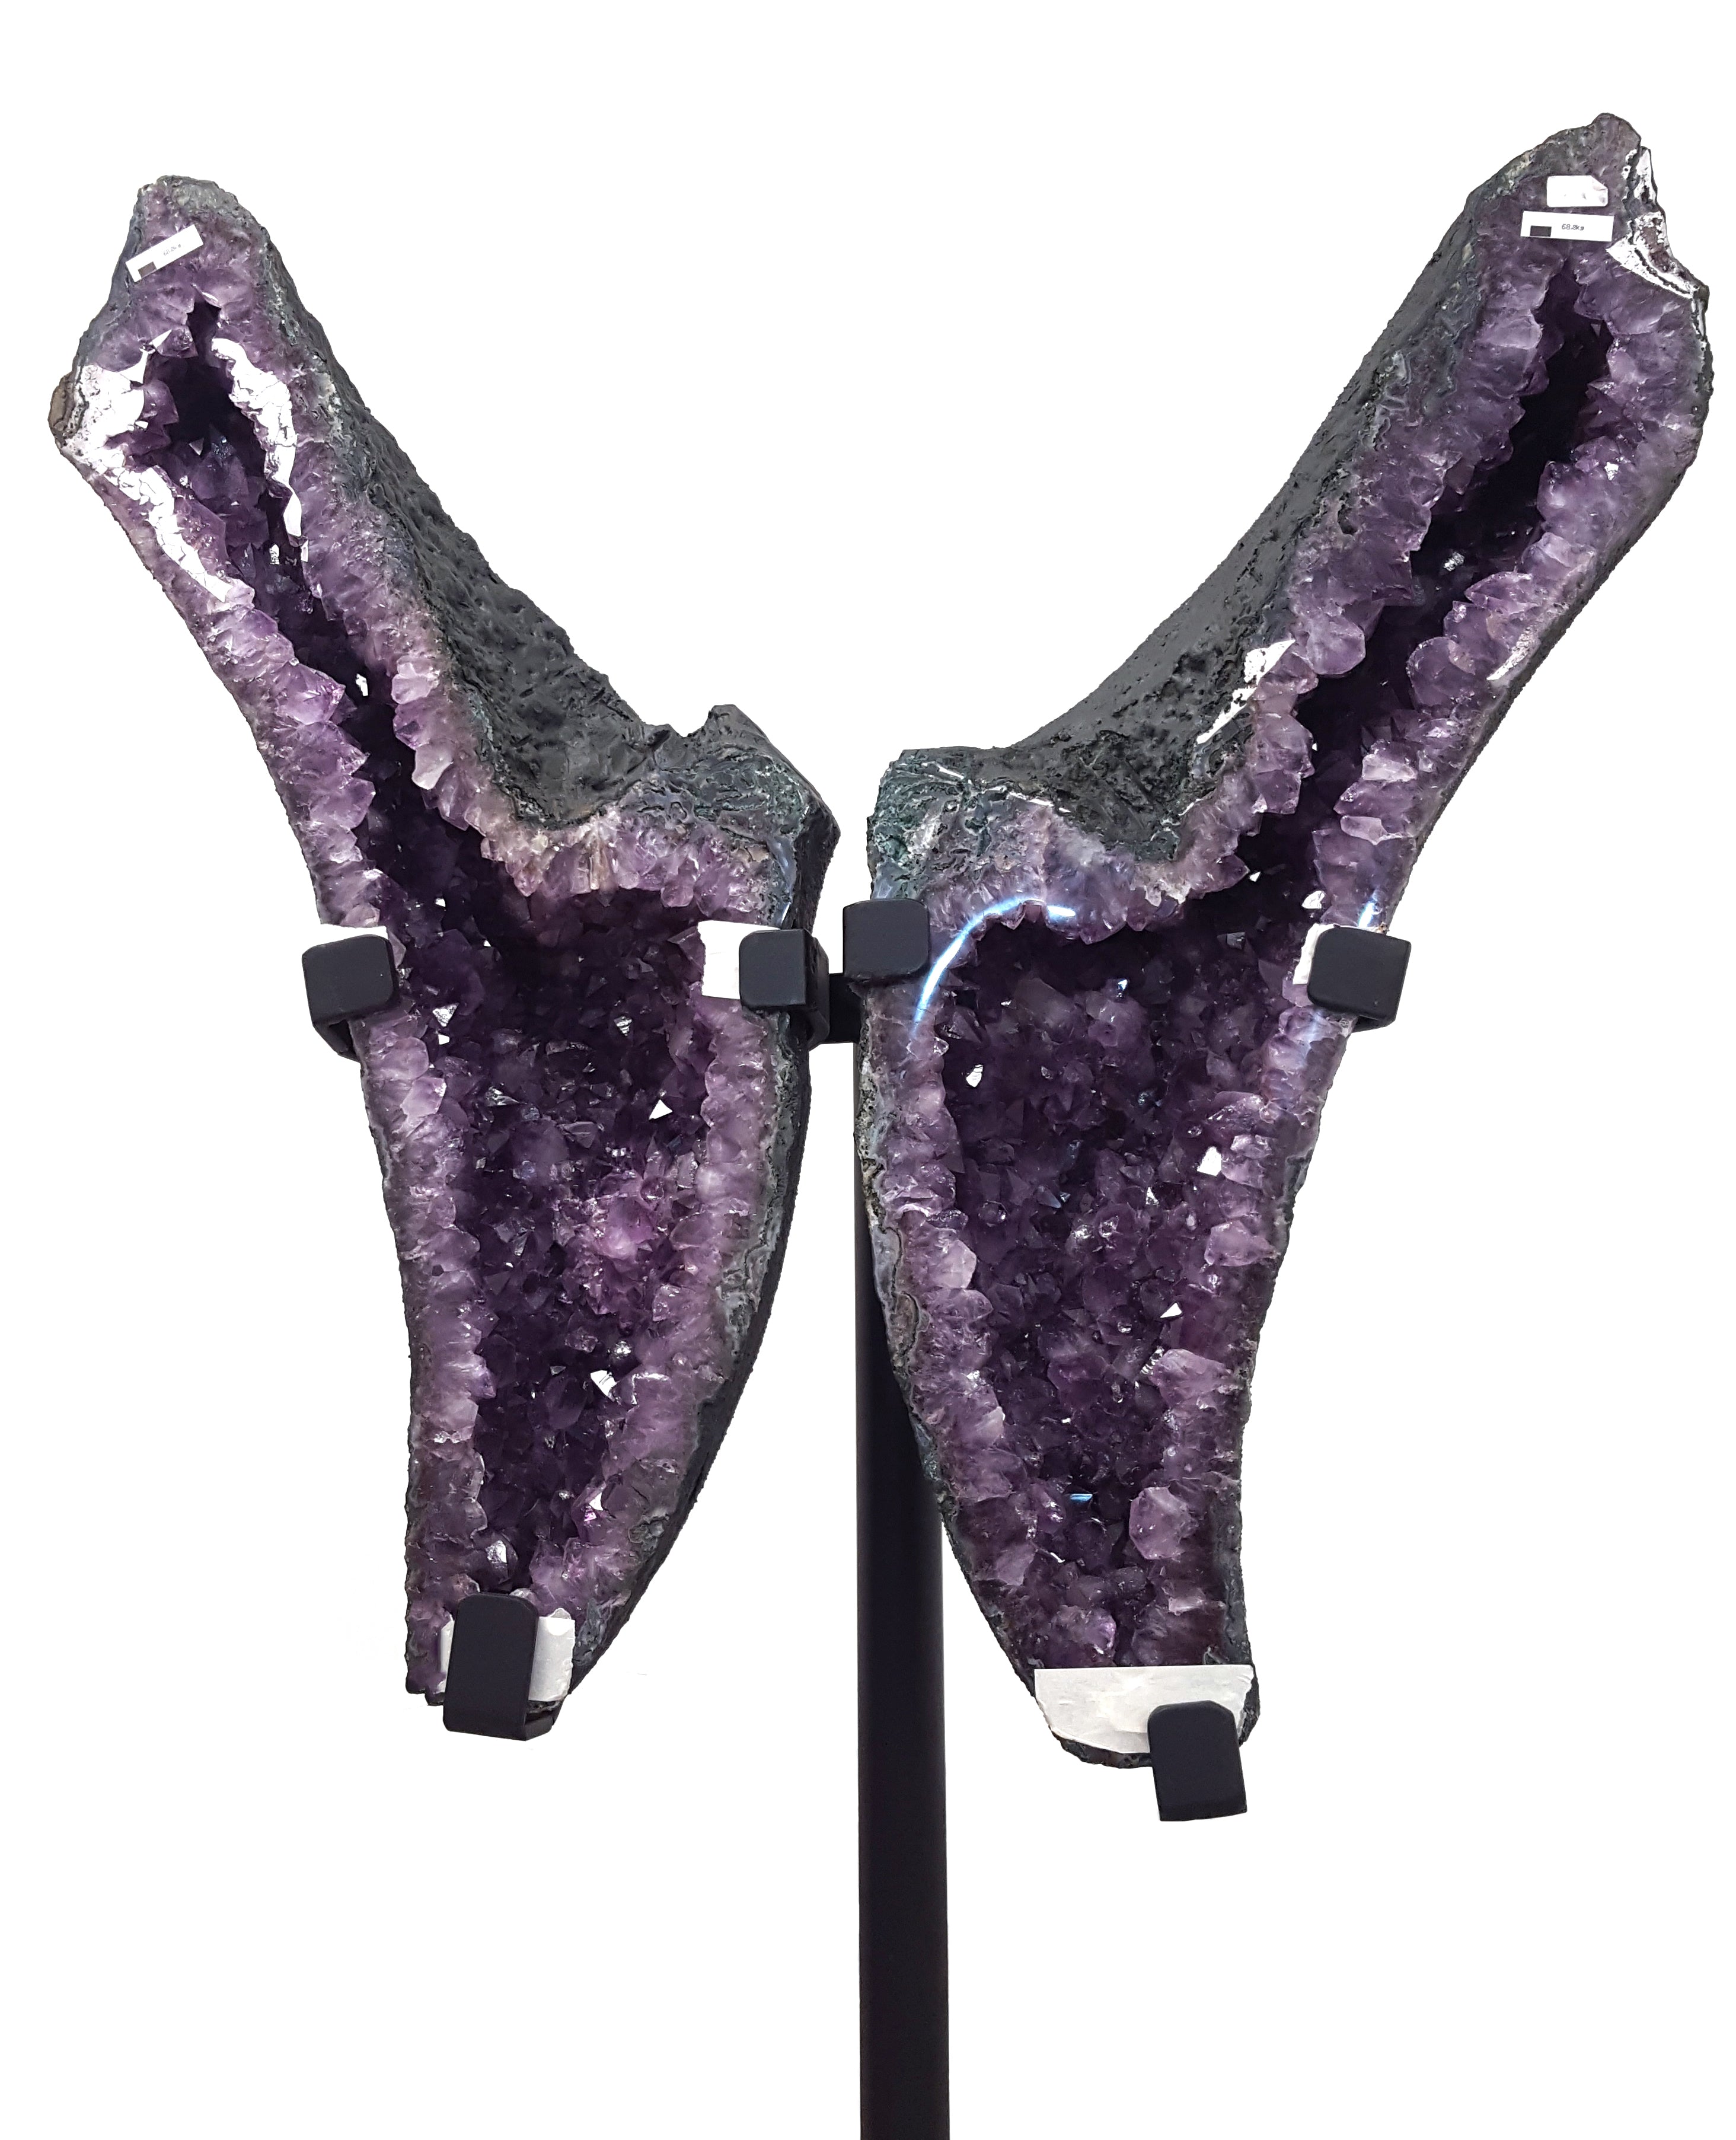 Grey and purple, shiny, sparkly angular shaped crystals, wingshaped